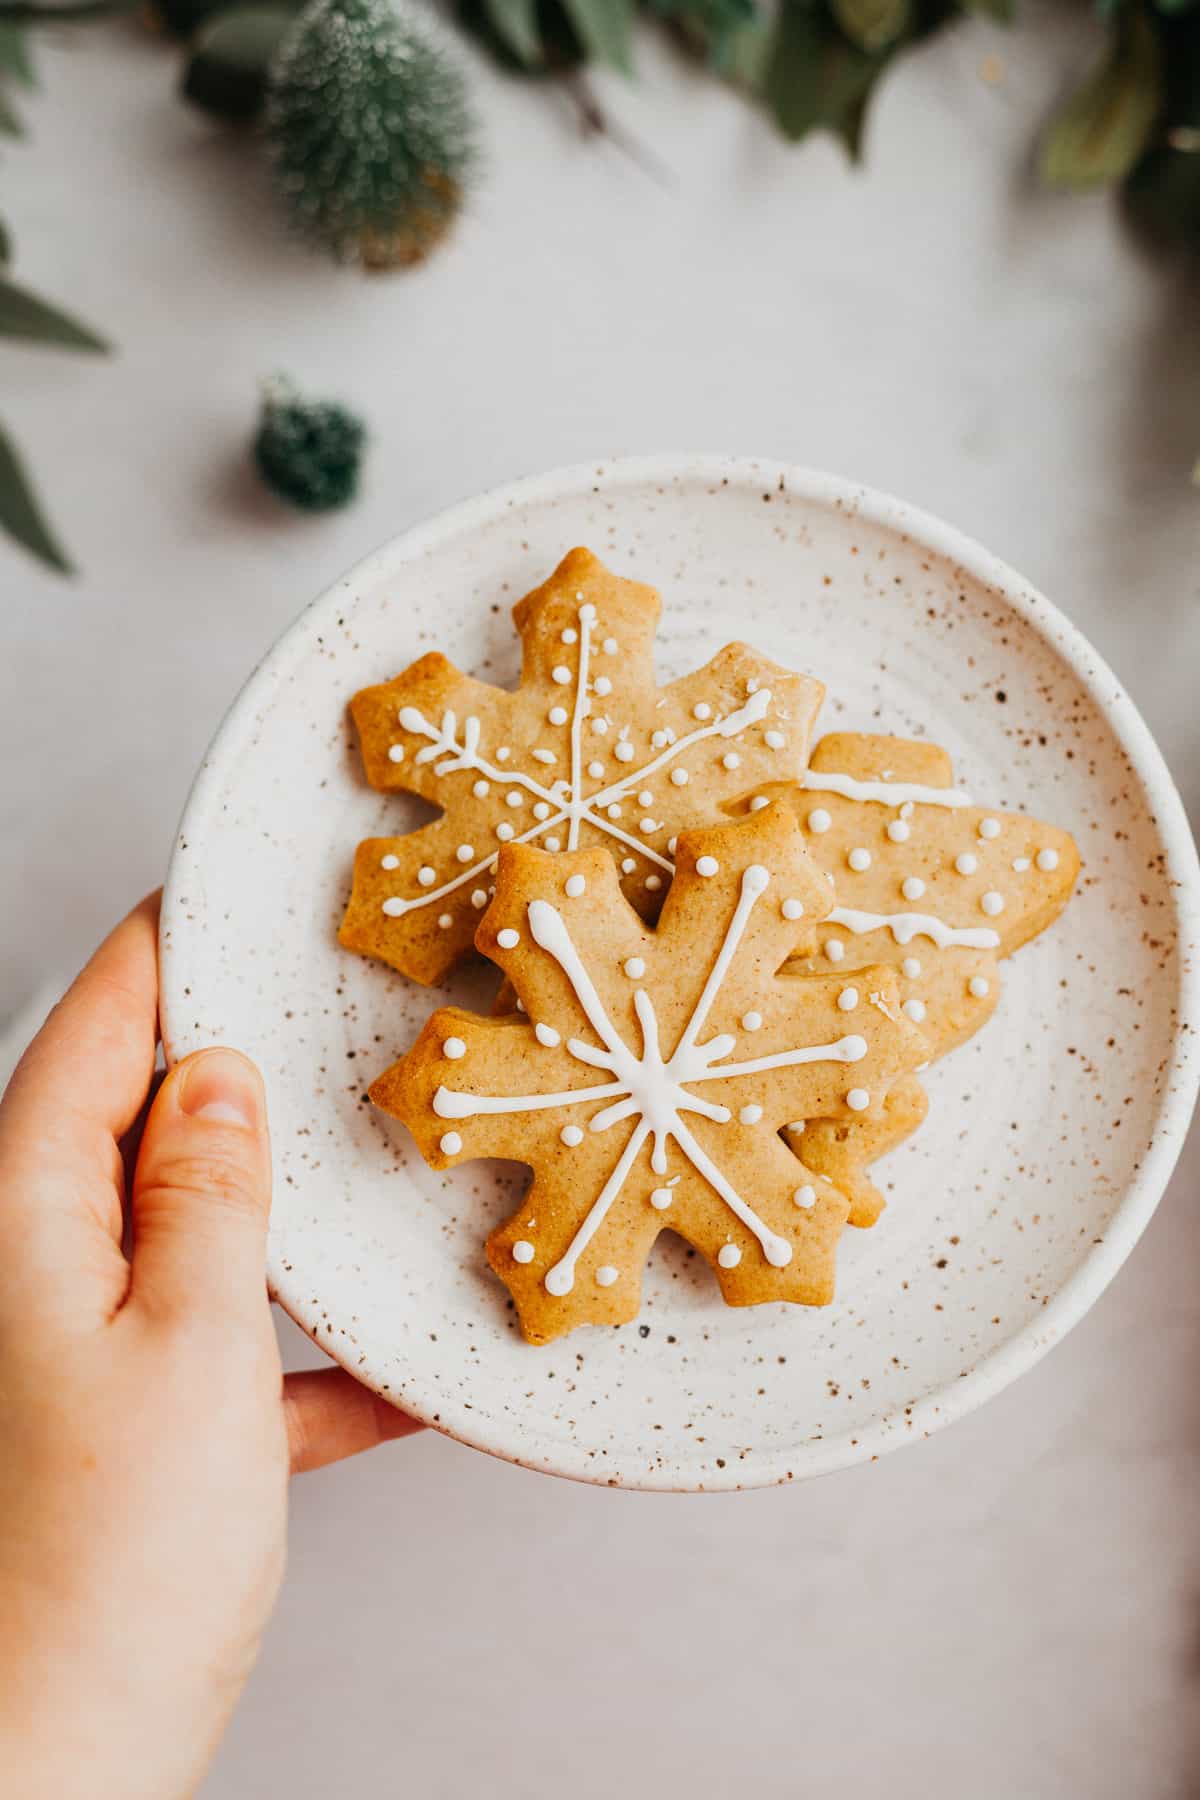 A woman's hand holding a small white plate with three decorated gingerbread cookies in the shape of snowflakes.